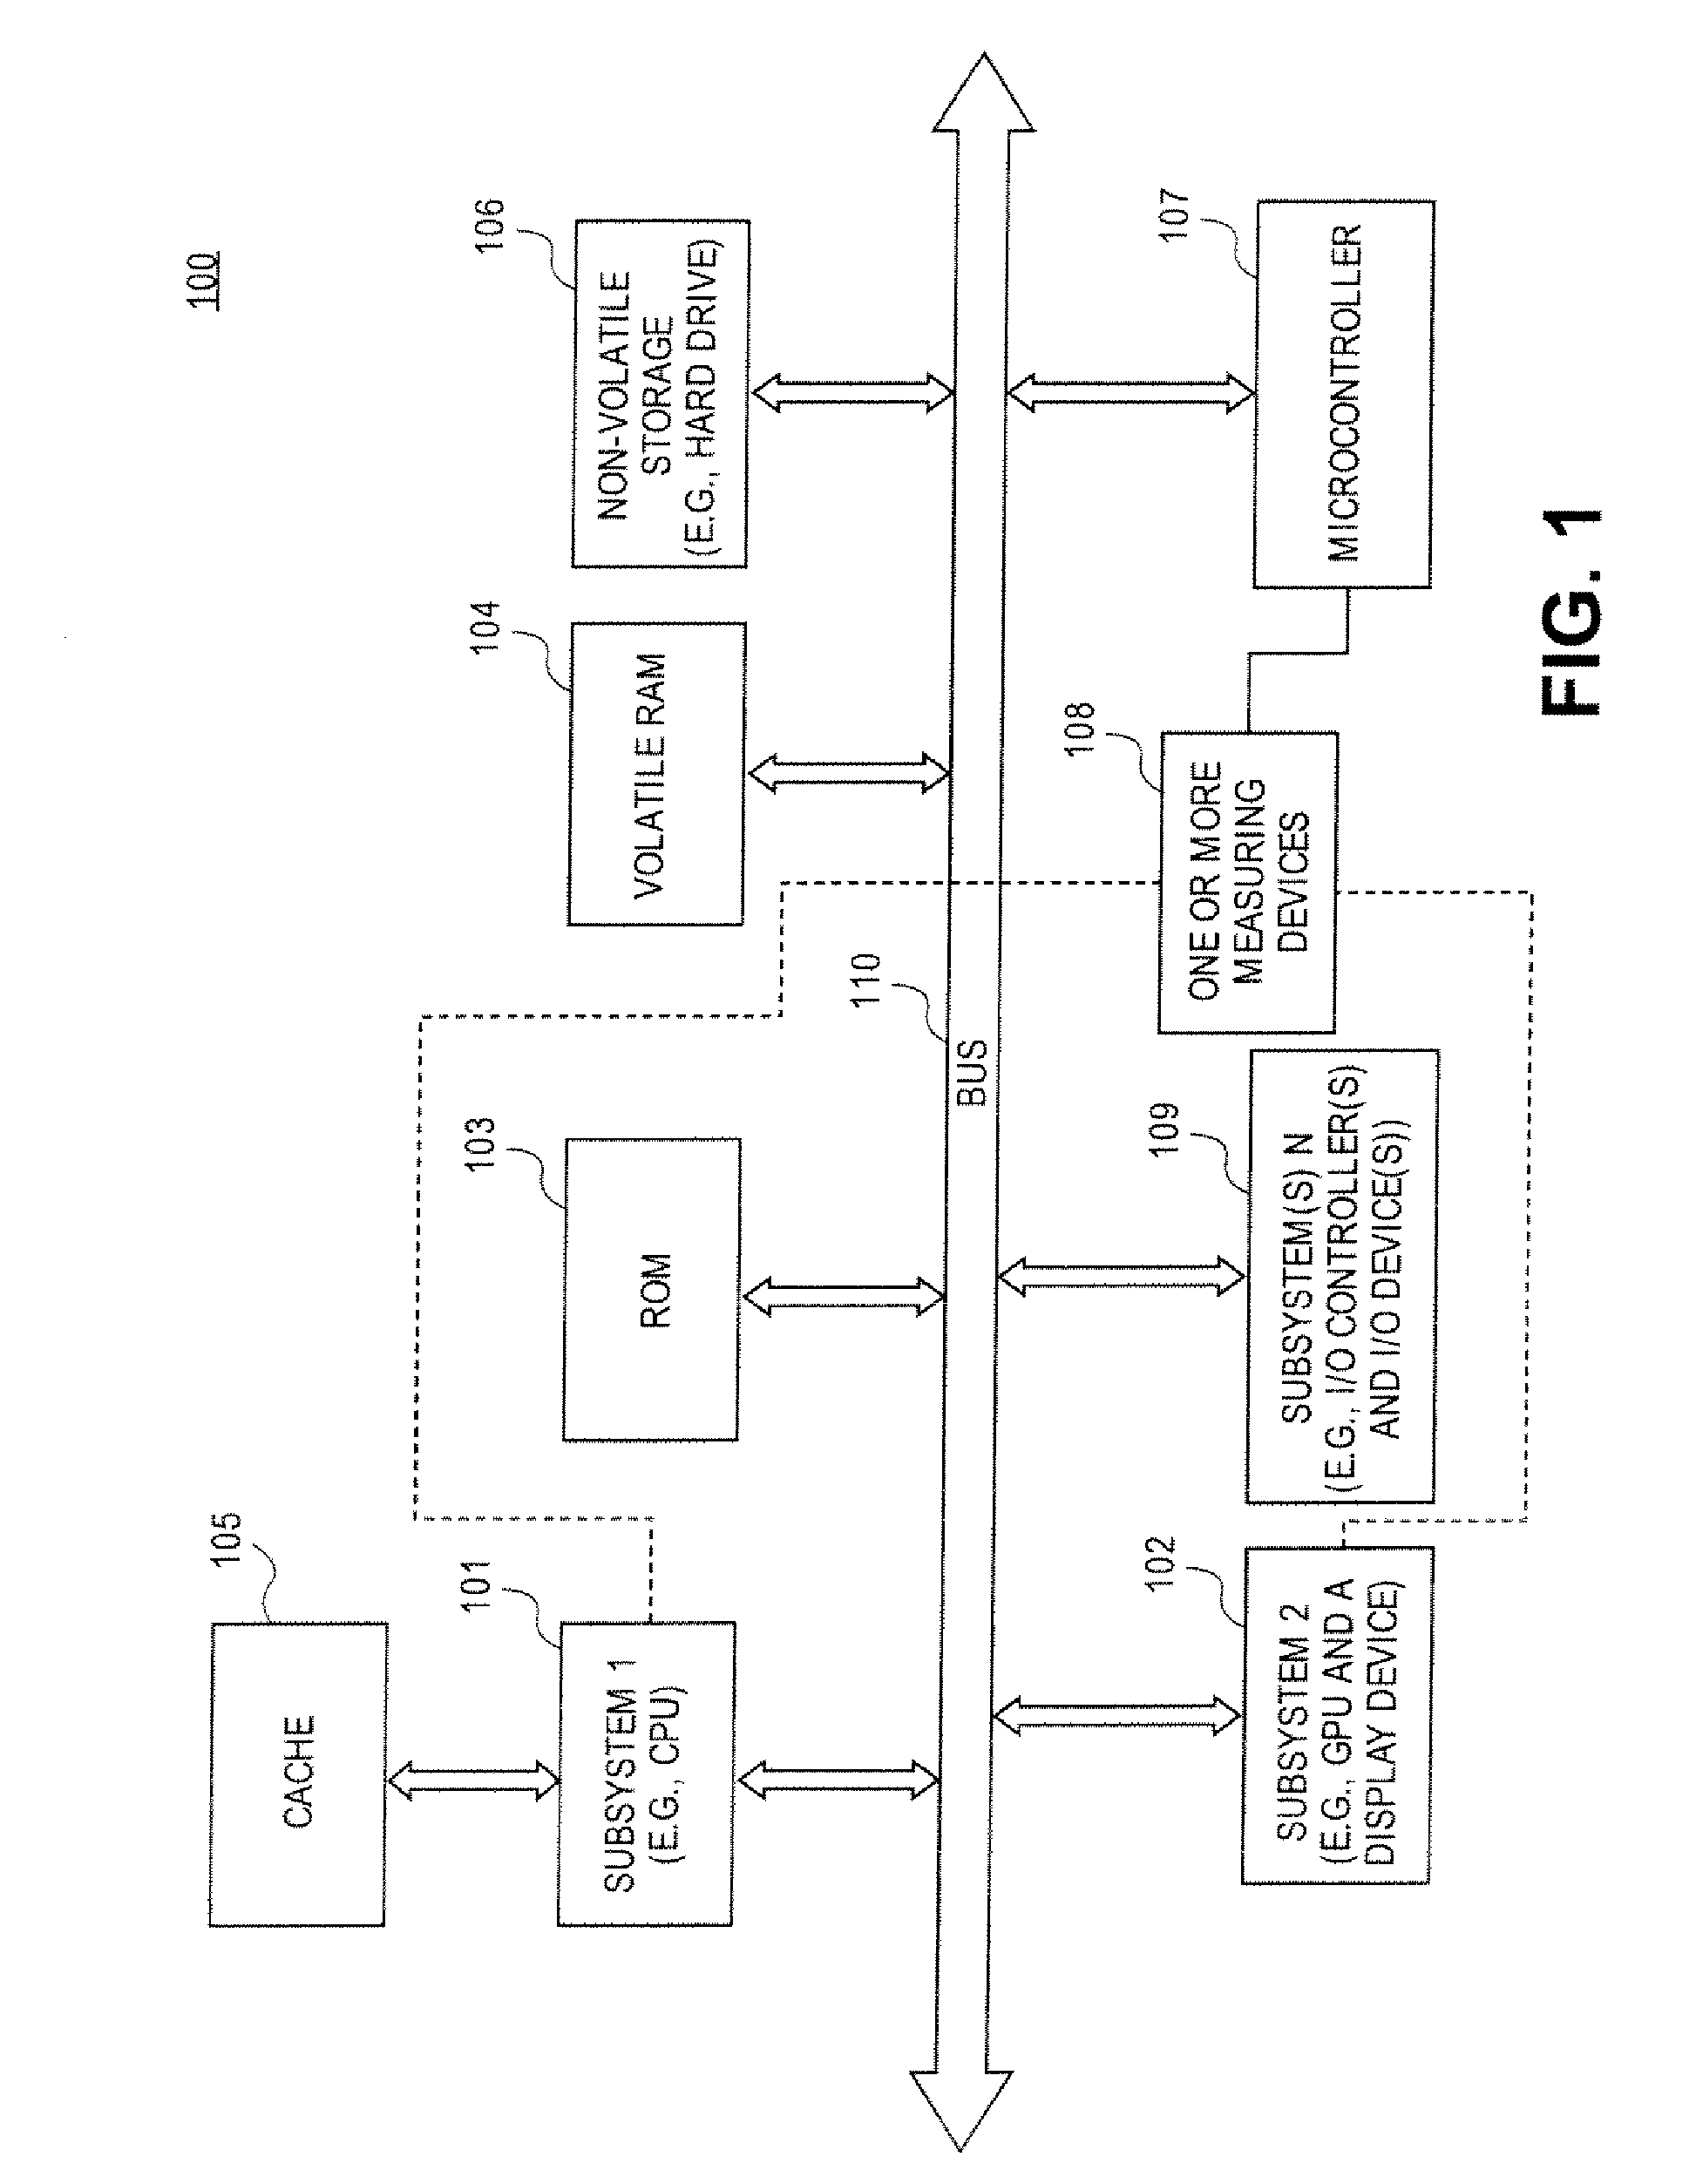 Automatic adjustment of thermal requirement